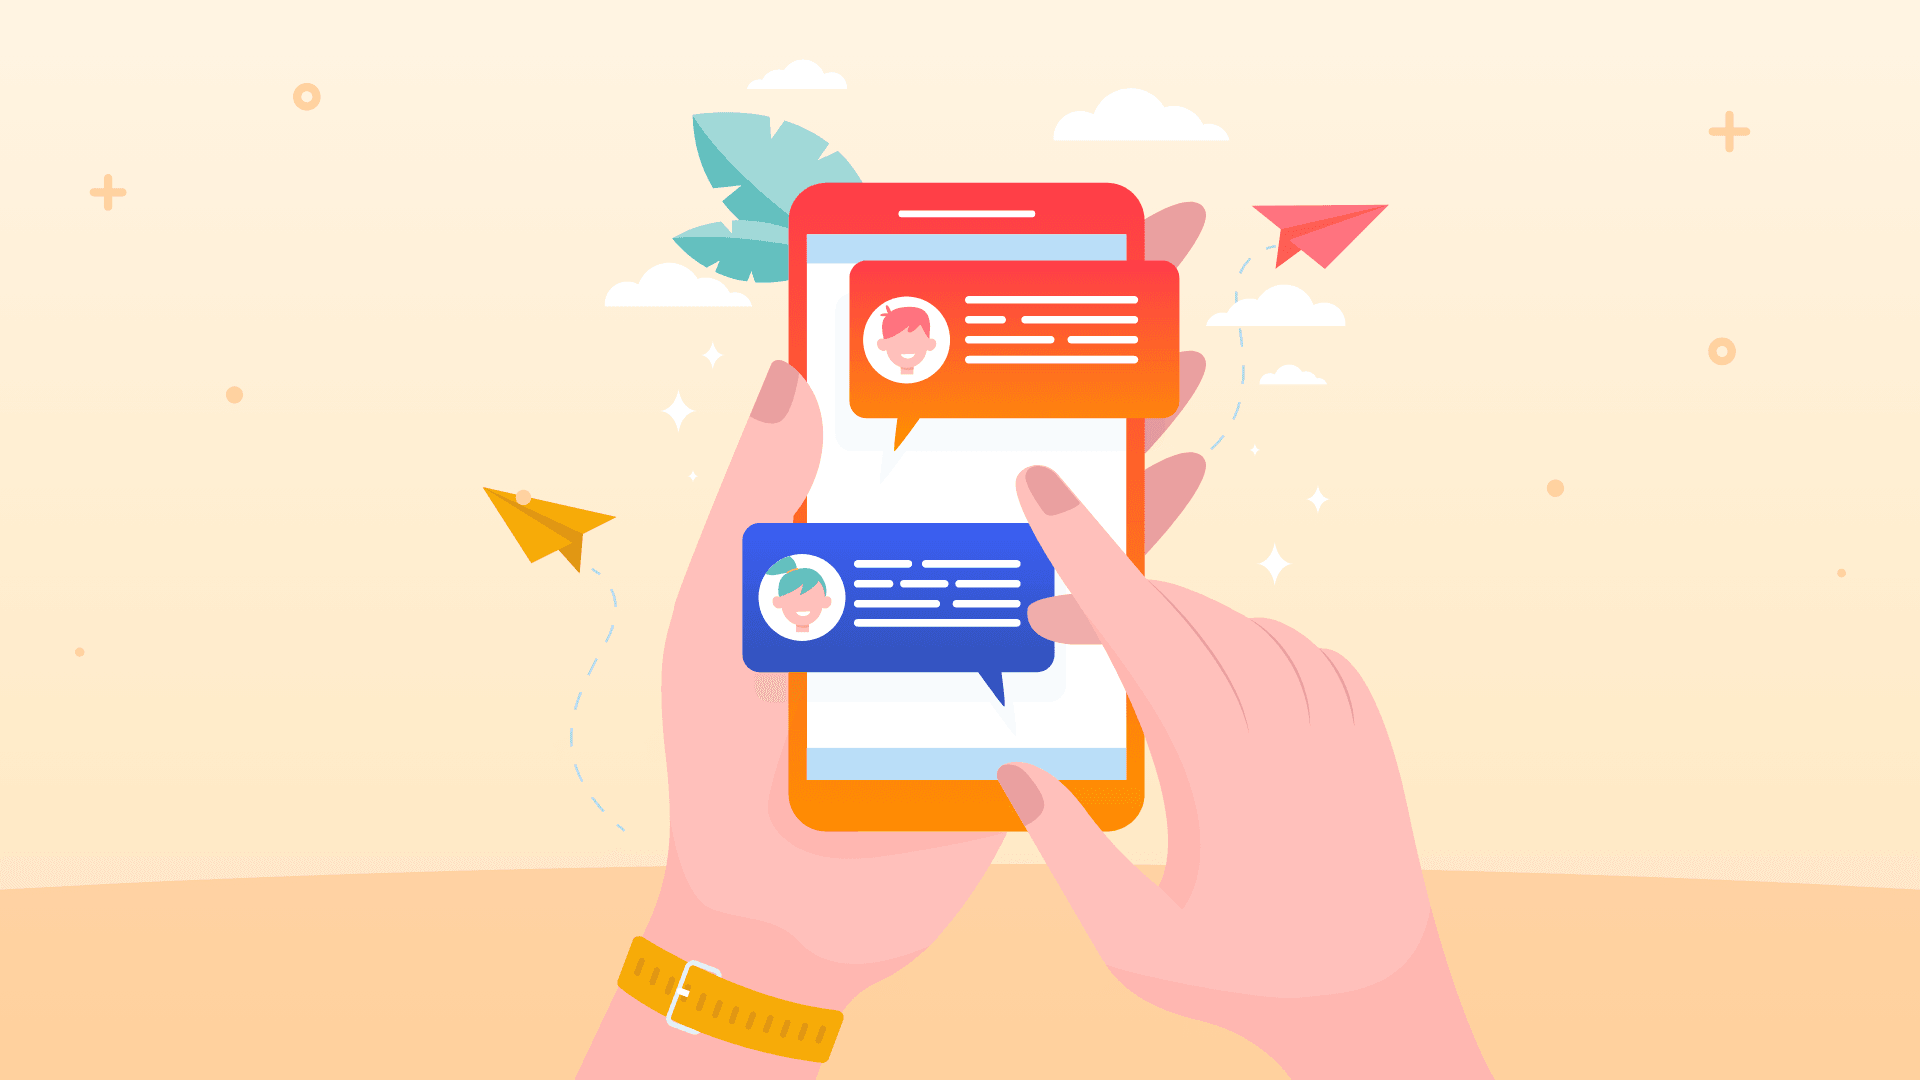 automated-data-collection-chatbot-marketing-illustration